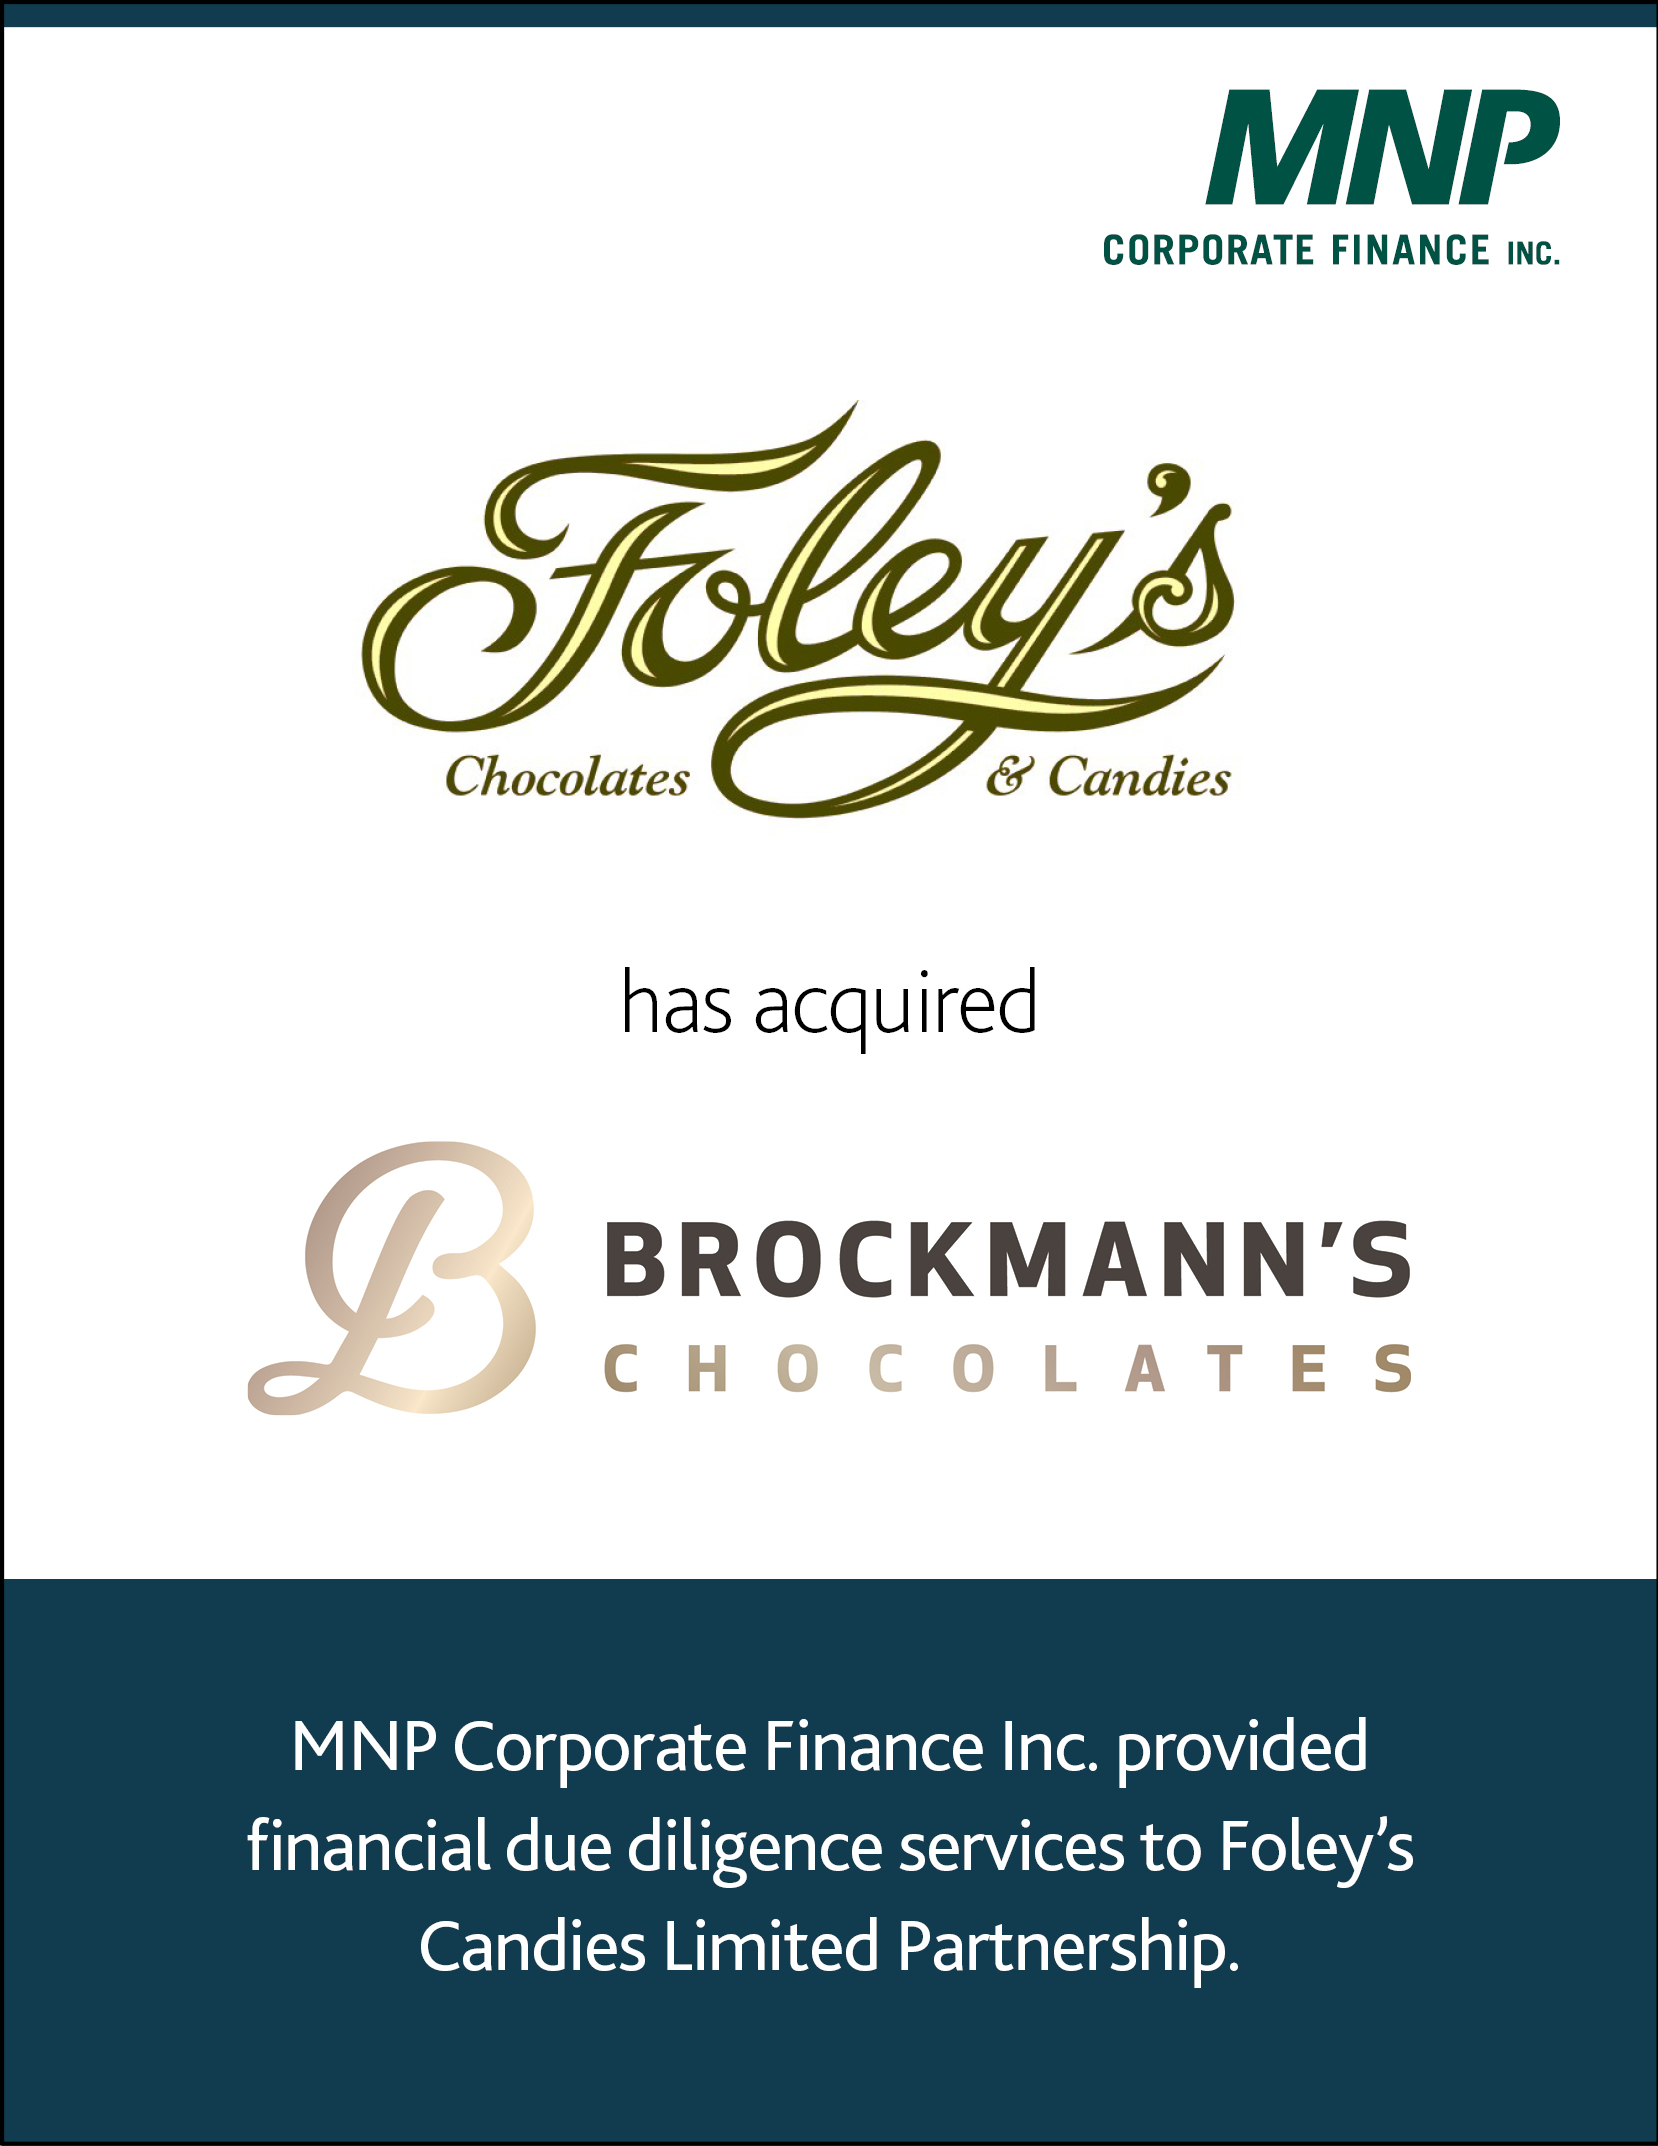 Foley's Chocolates & Candies has acquired Brockmann's Chocolates 